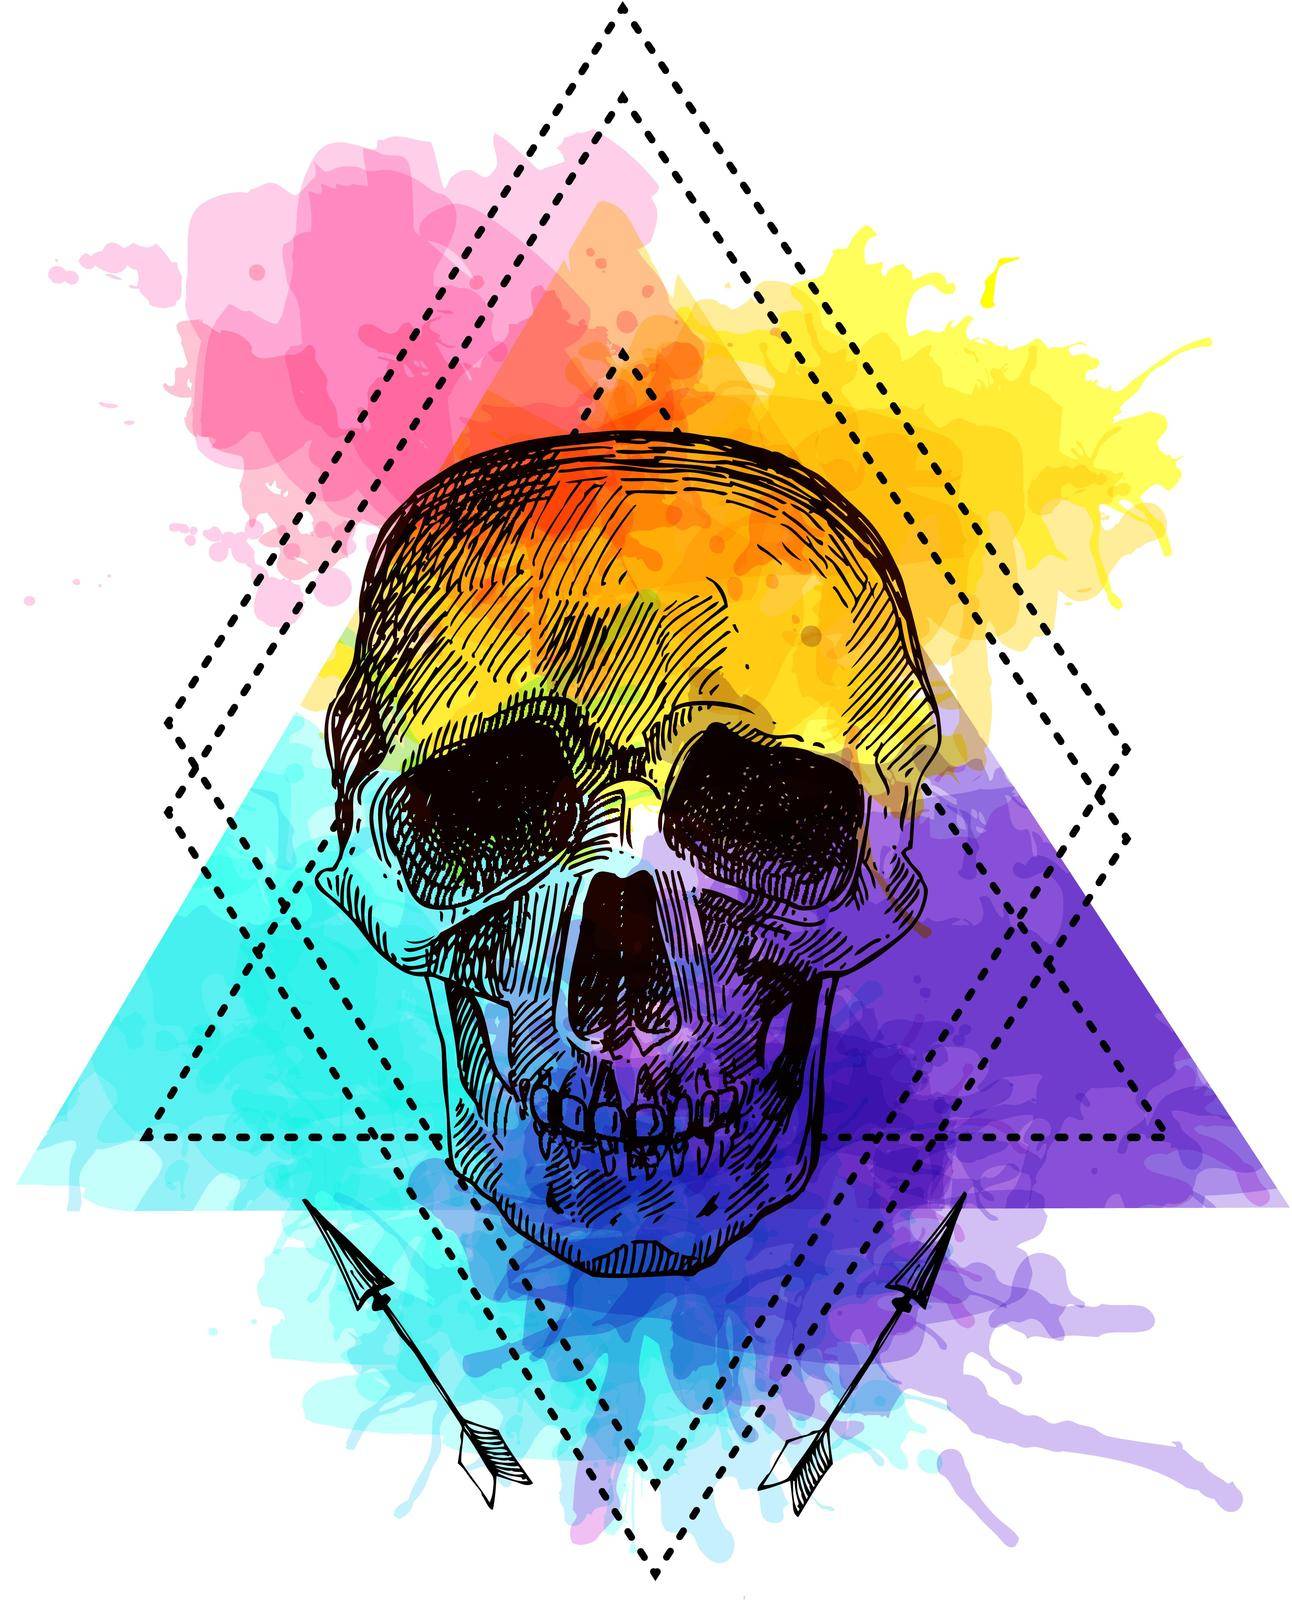 Beautiful hand drawn sketch illustration the skull on the watercolor background. Boho style print for T-shirt. Tattoo style skull.